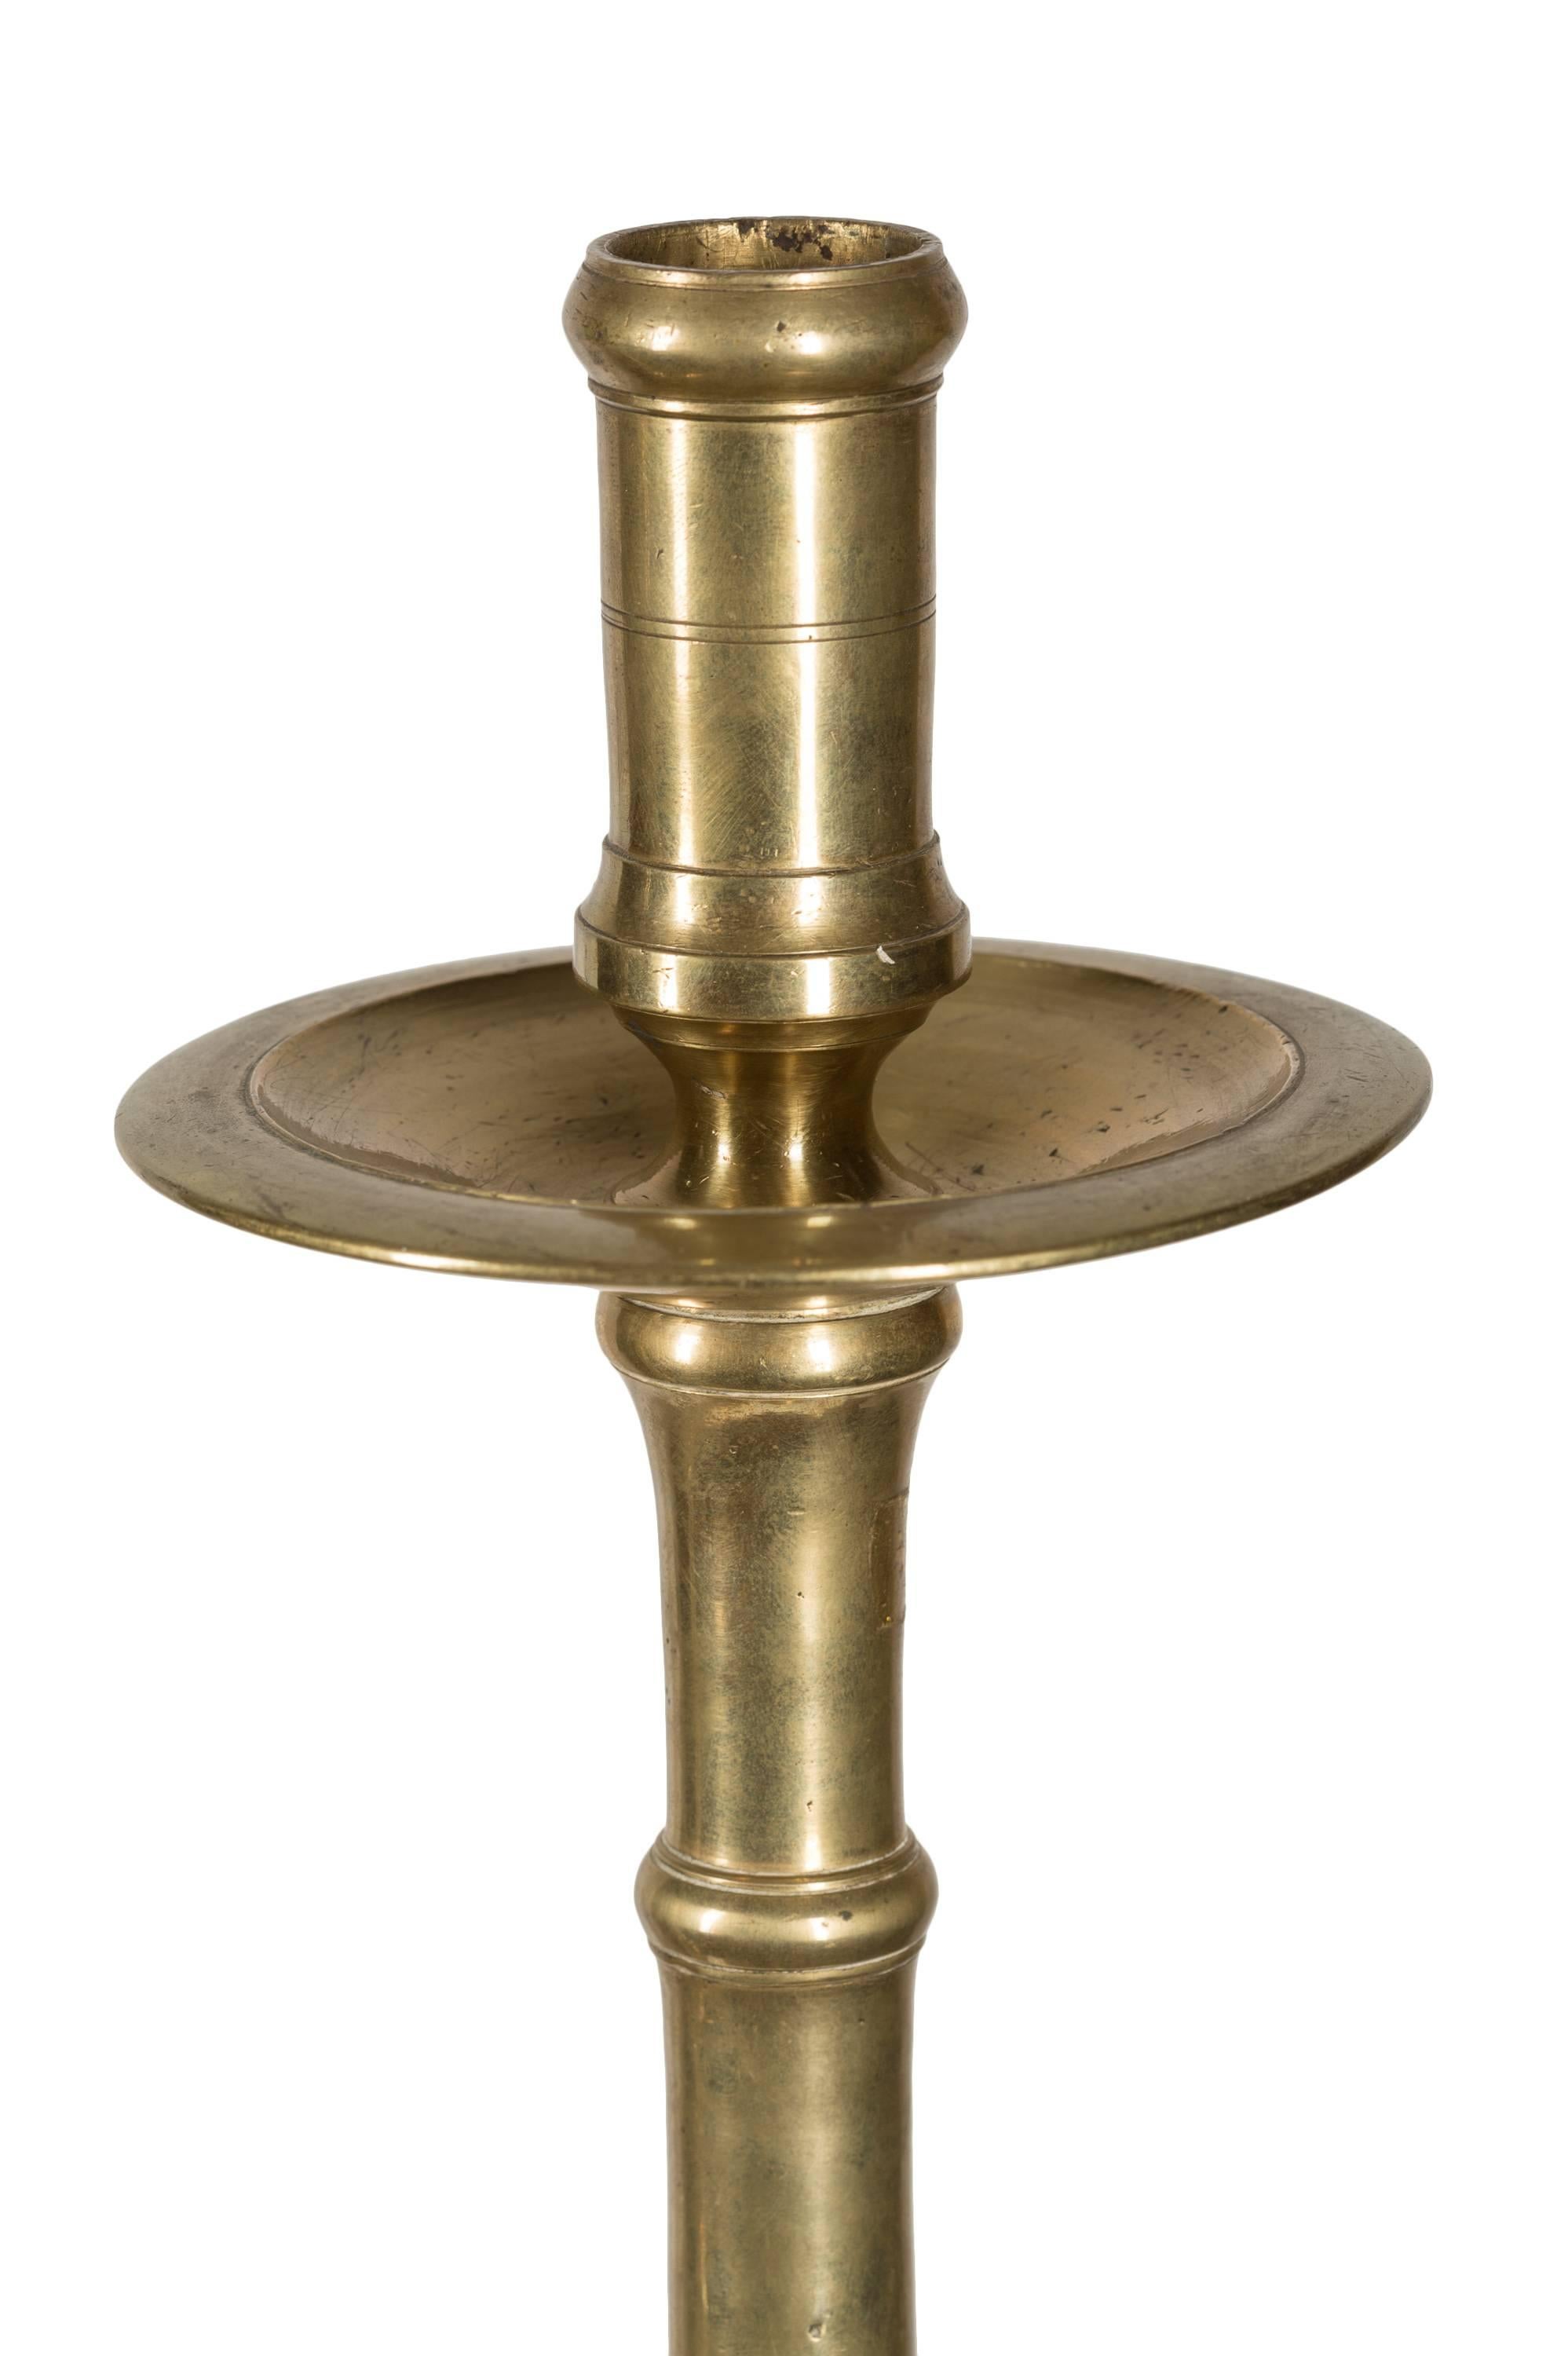 This classic pair of dramatic (over one-half meter tall) 19th century Spanish church altar candlesticks will make for a strong centerpiece or accent in a variety of interior styles. 
The use of candles has been part of the Catholic ritual since